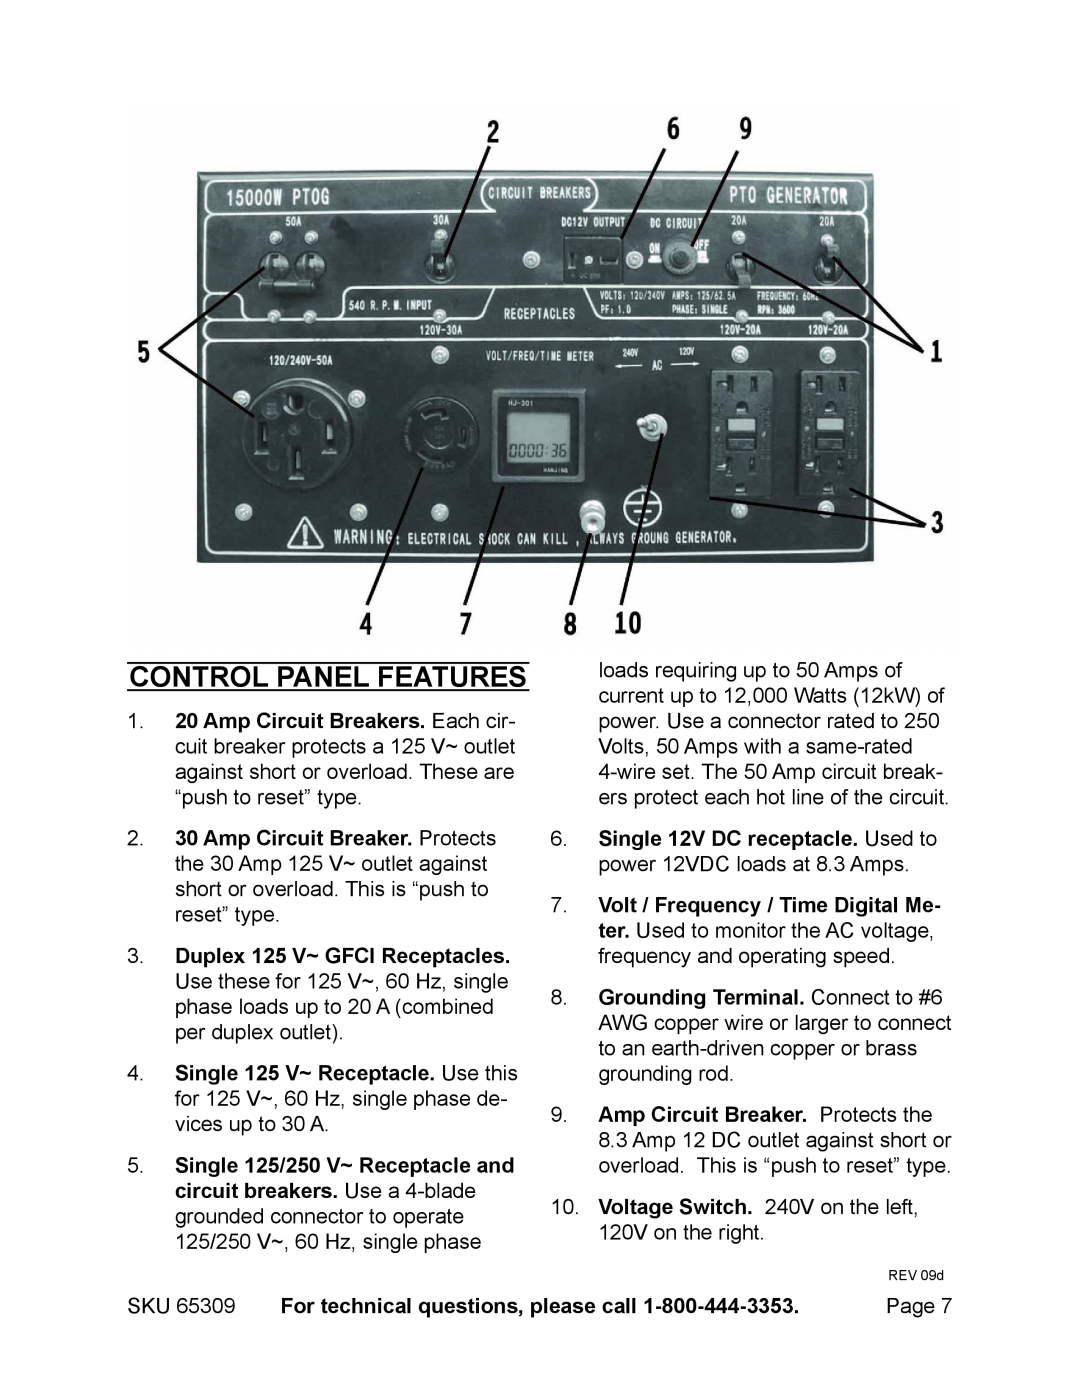 Harbor Freight Tools 65309 manual Control Panel Features, REV 09d 